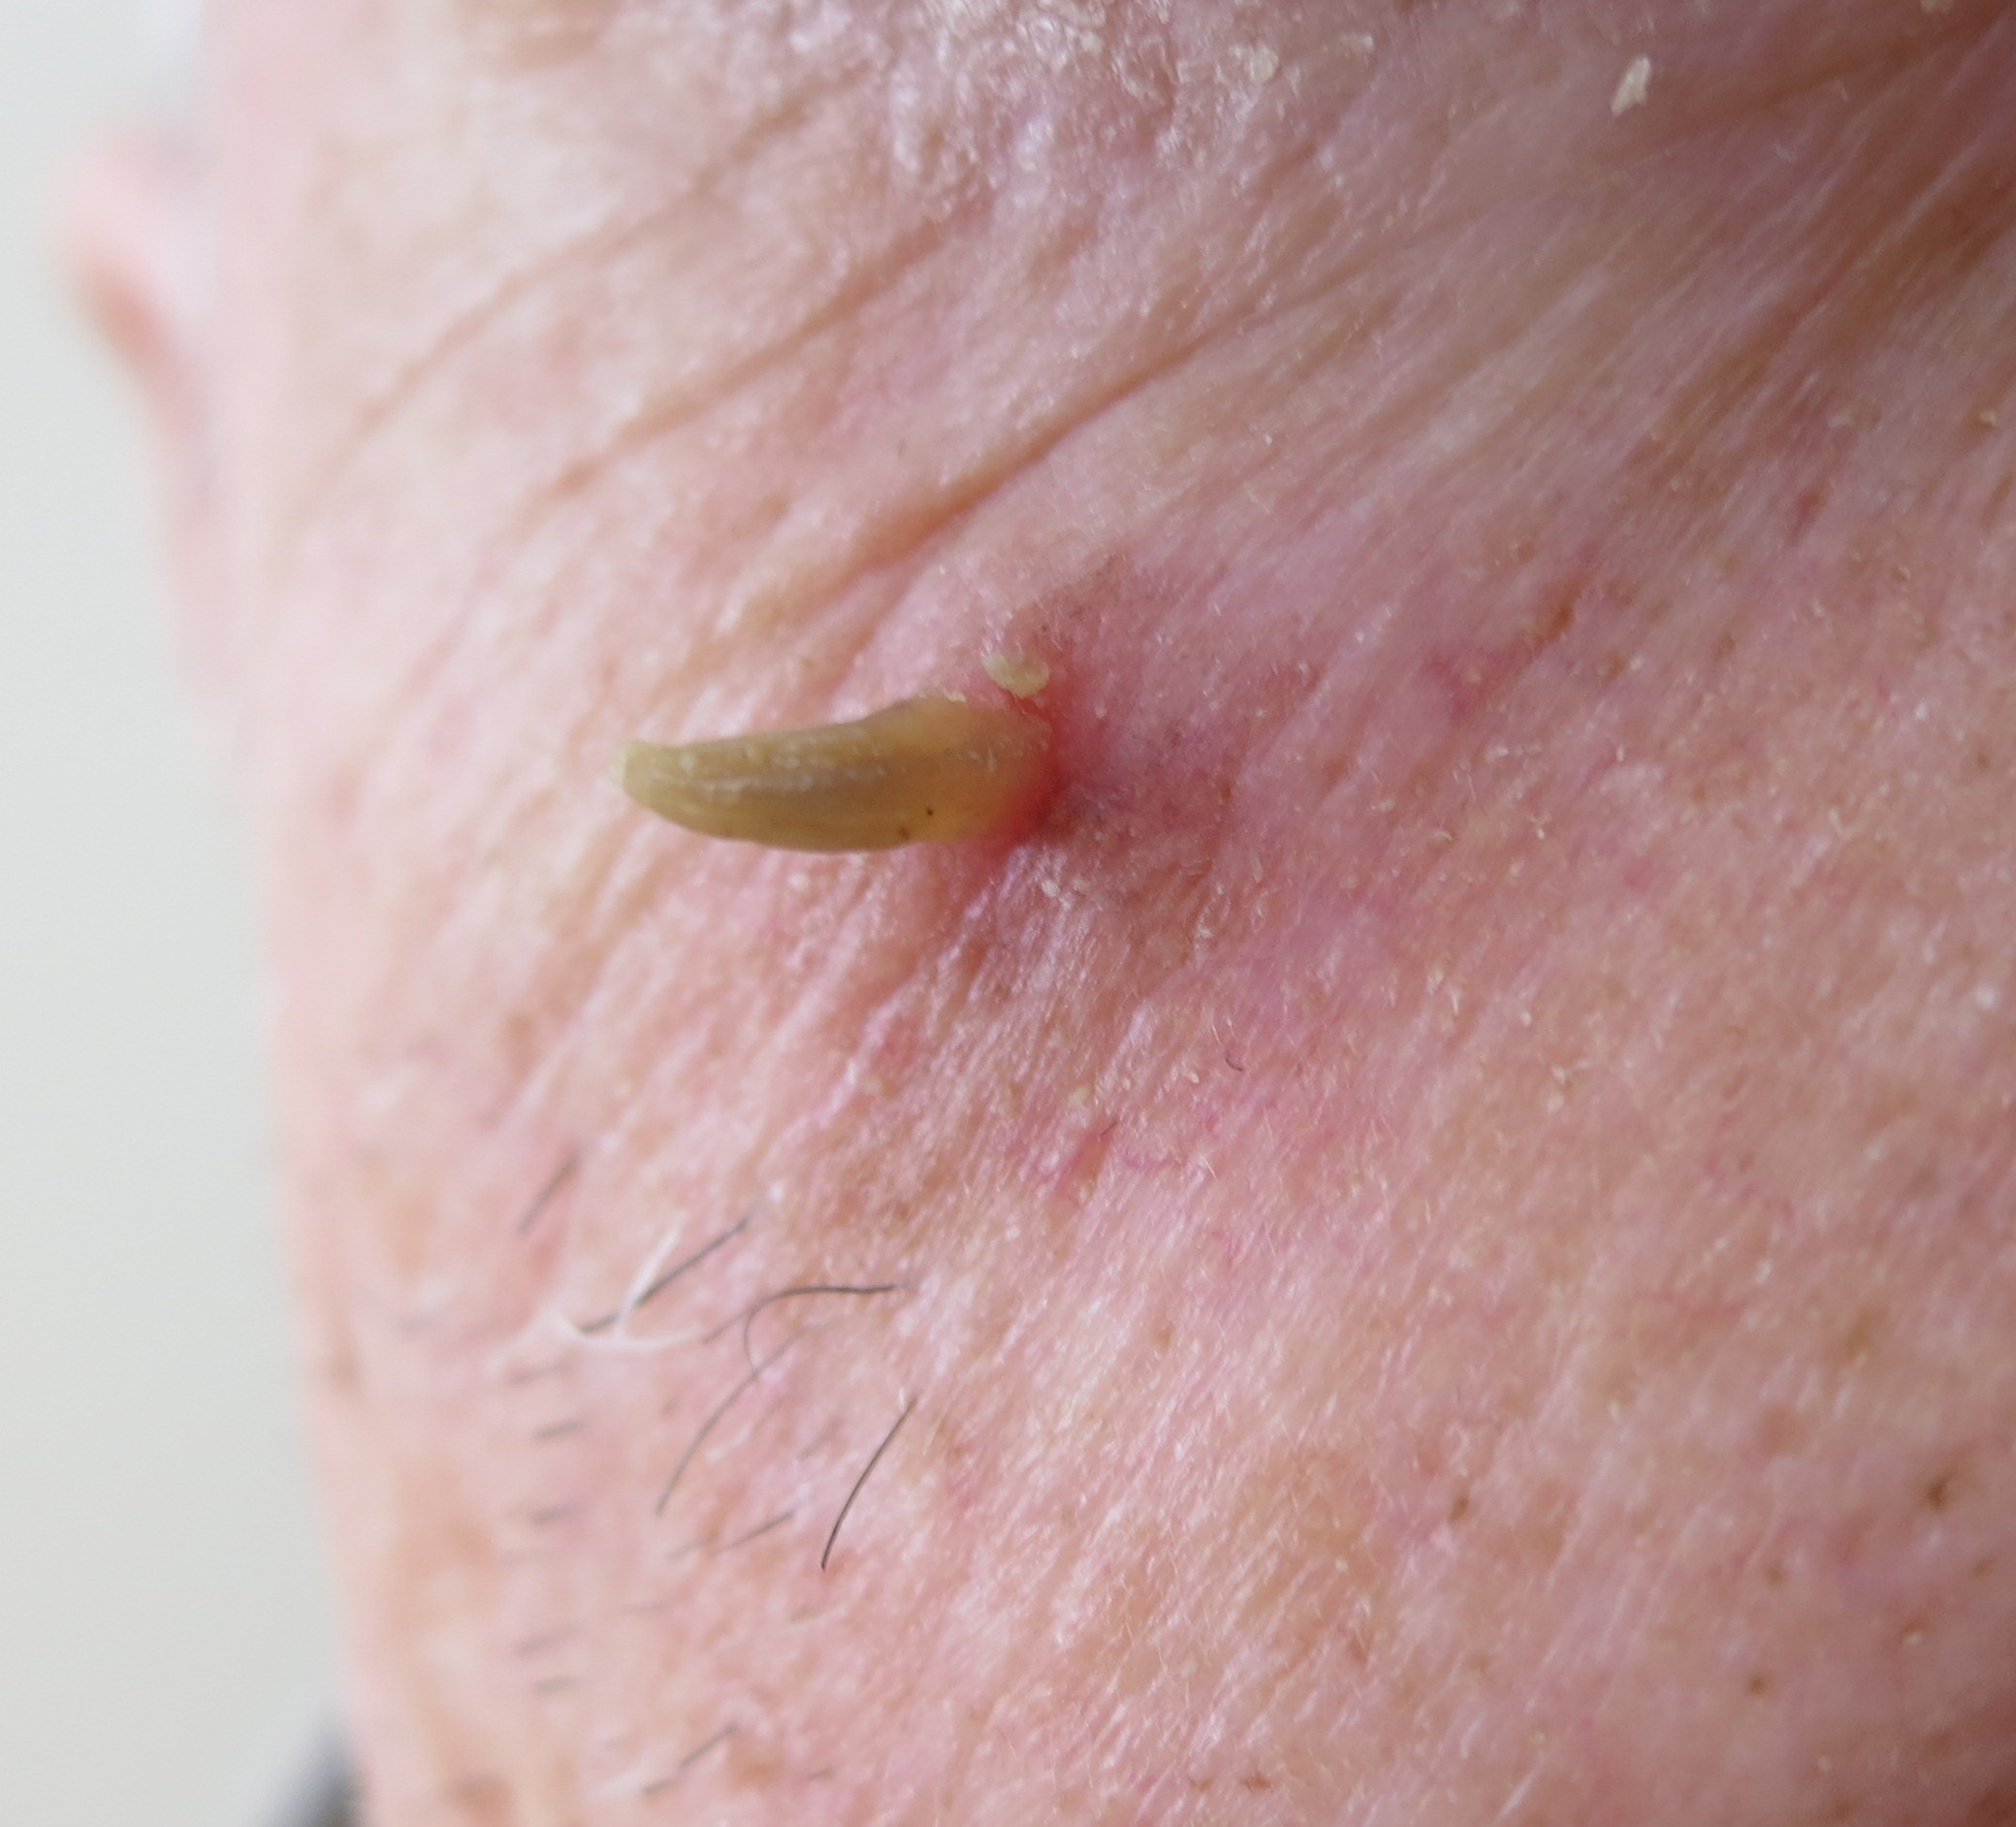 Actinic Keratosis – Picture, Causes, Treatment, Images